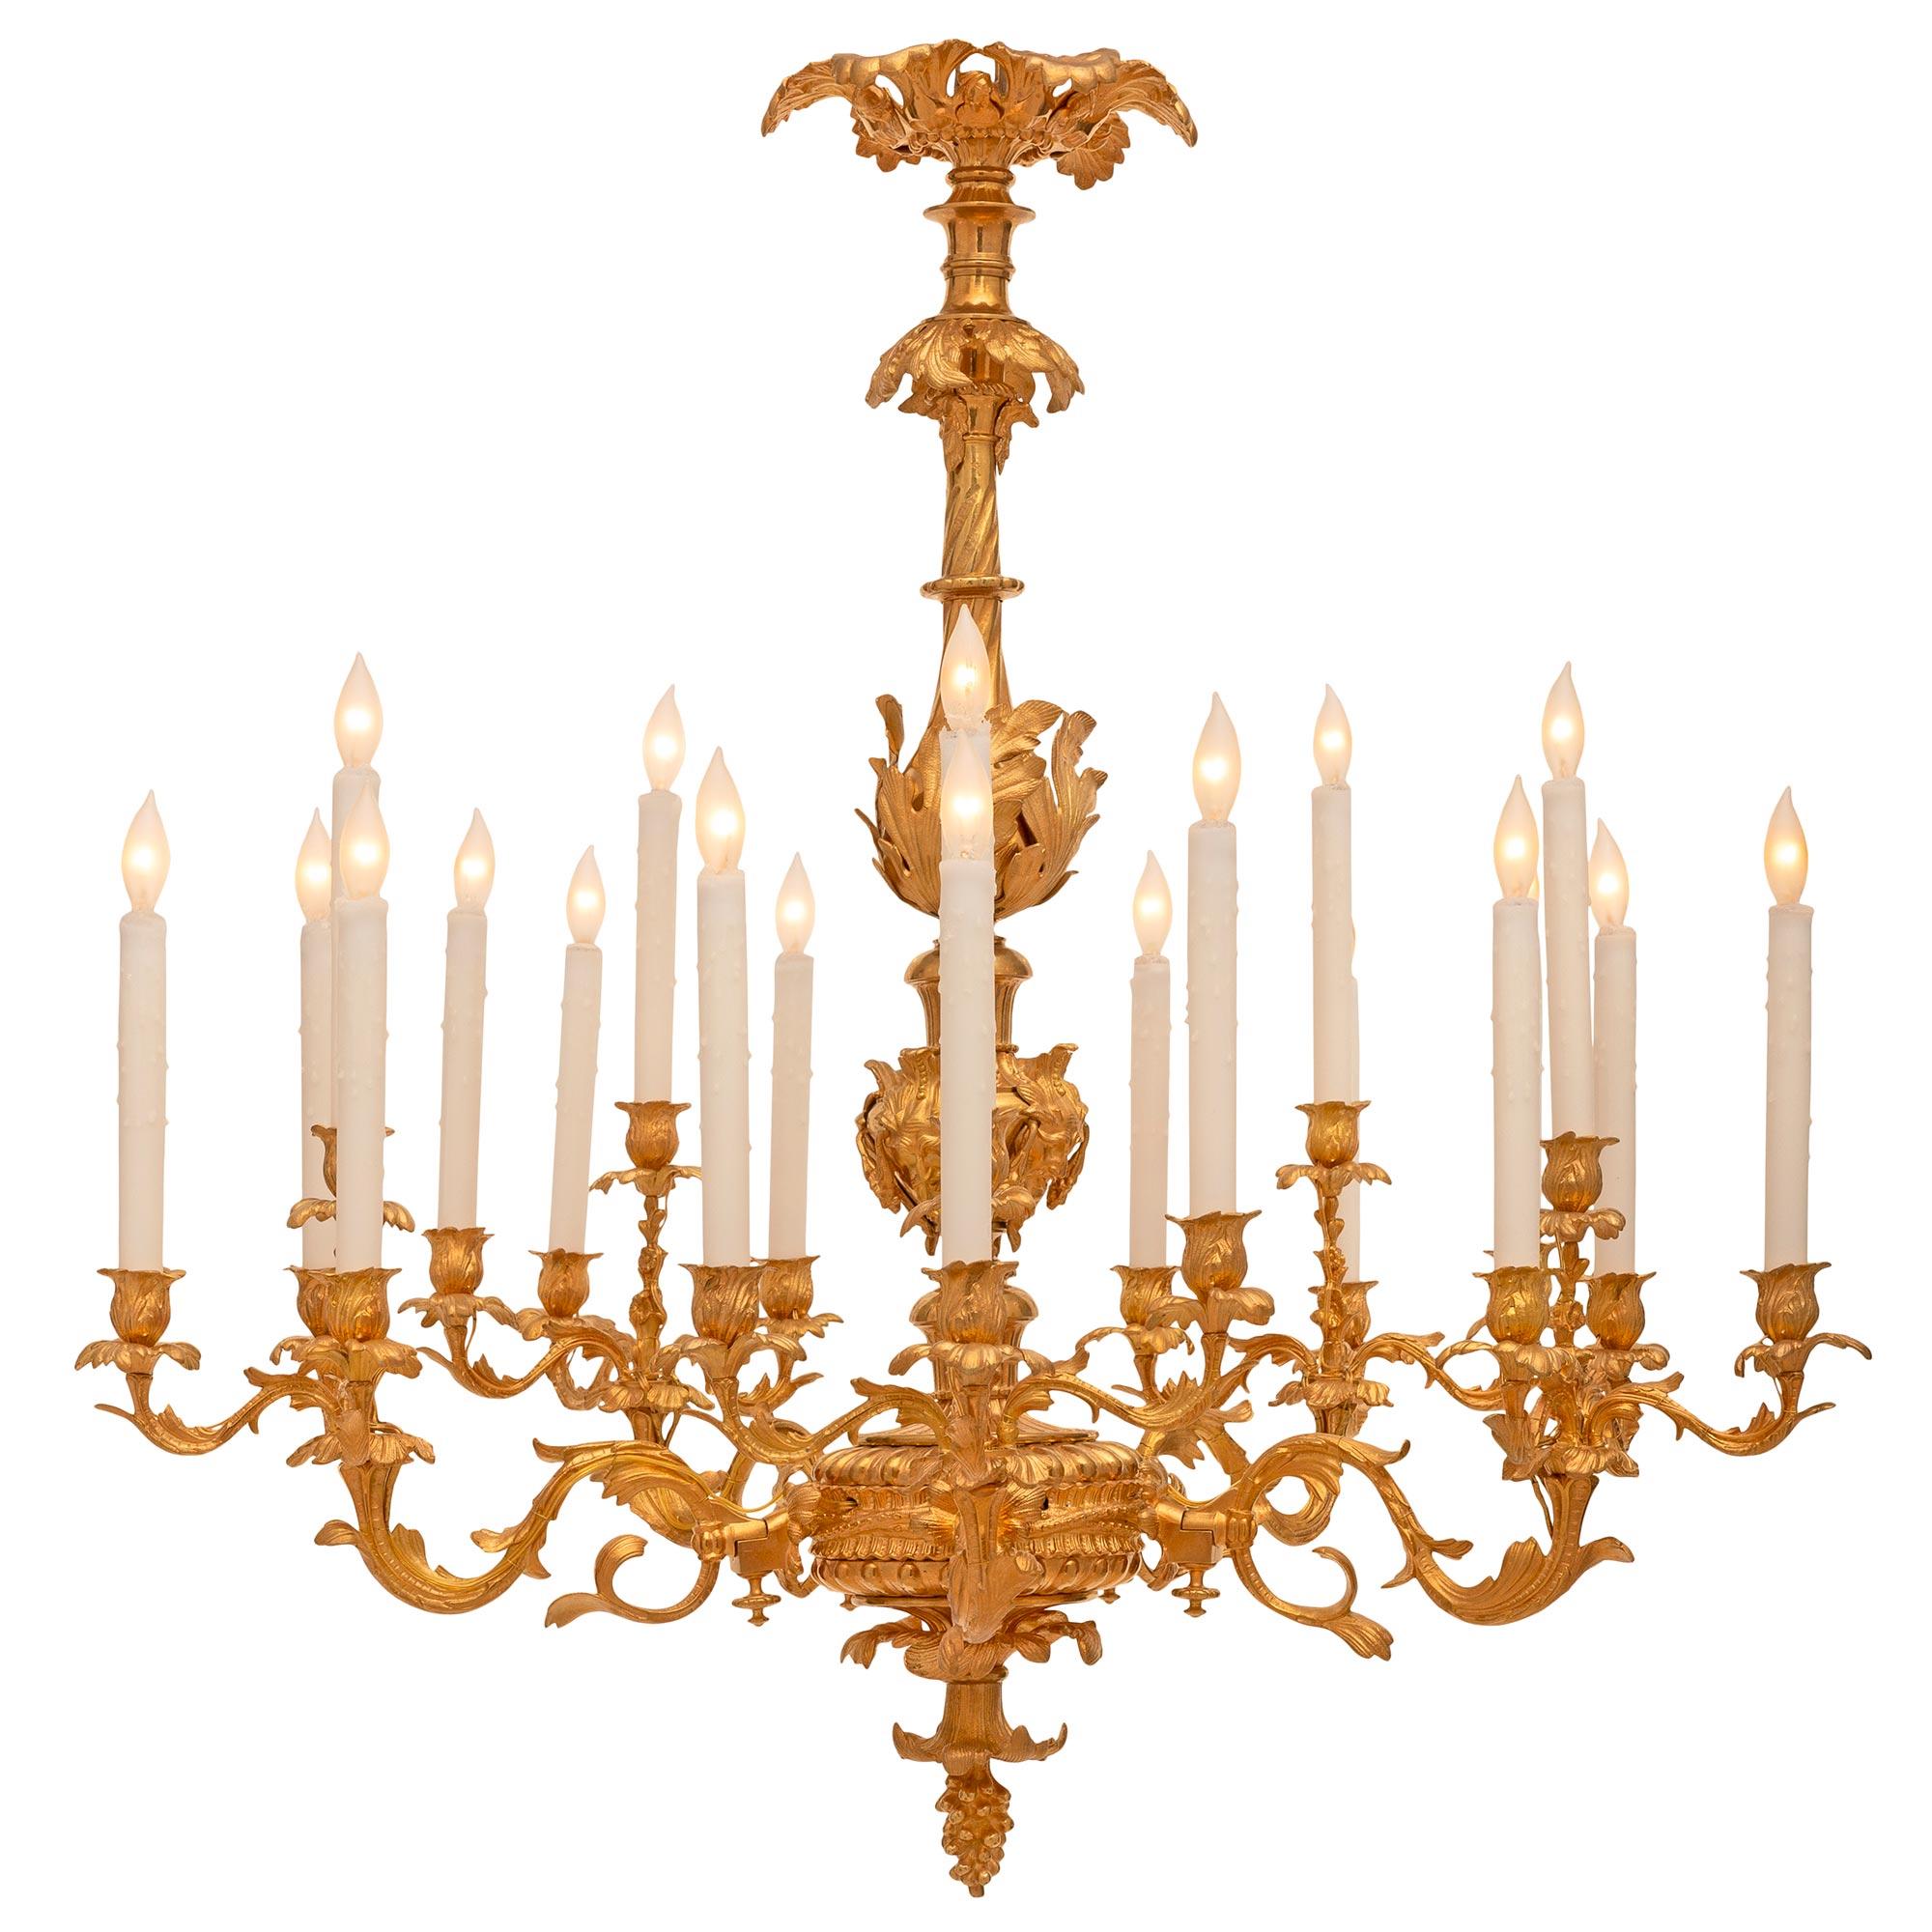 An impressive and high quality French 19th century Louis XV st. ormolu chandelier. The twenty arm chandelier is centered by a beautiful bottom acorn finial below wonderful foliate movements and the reeded central reserve. The arms are grouped into